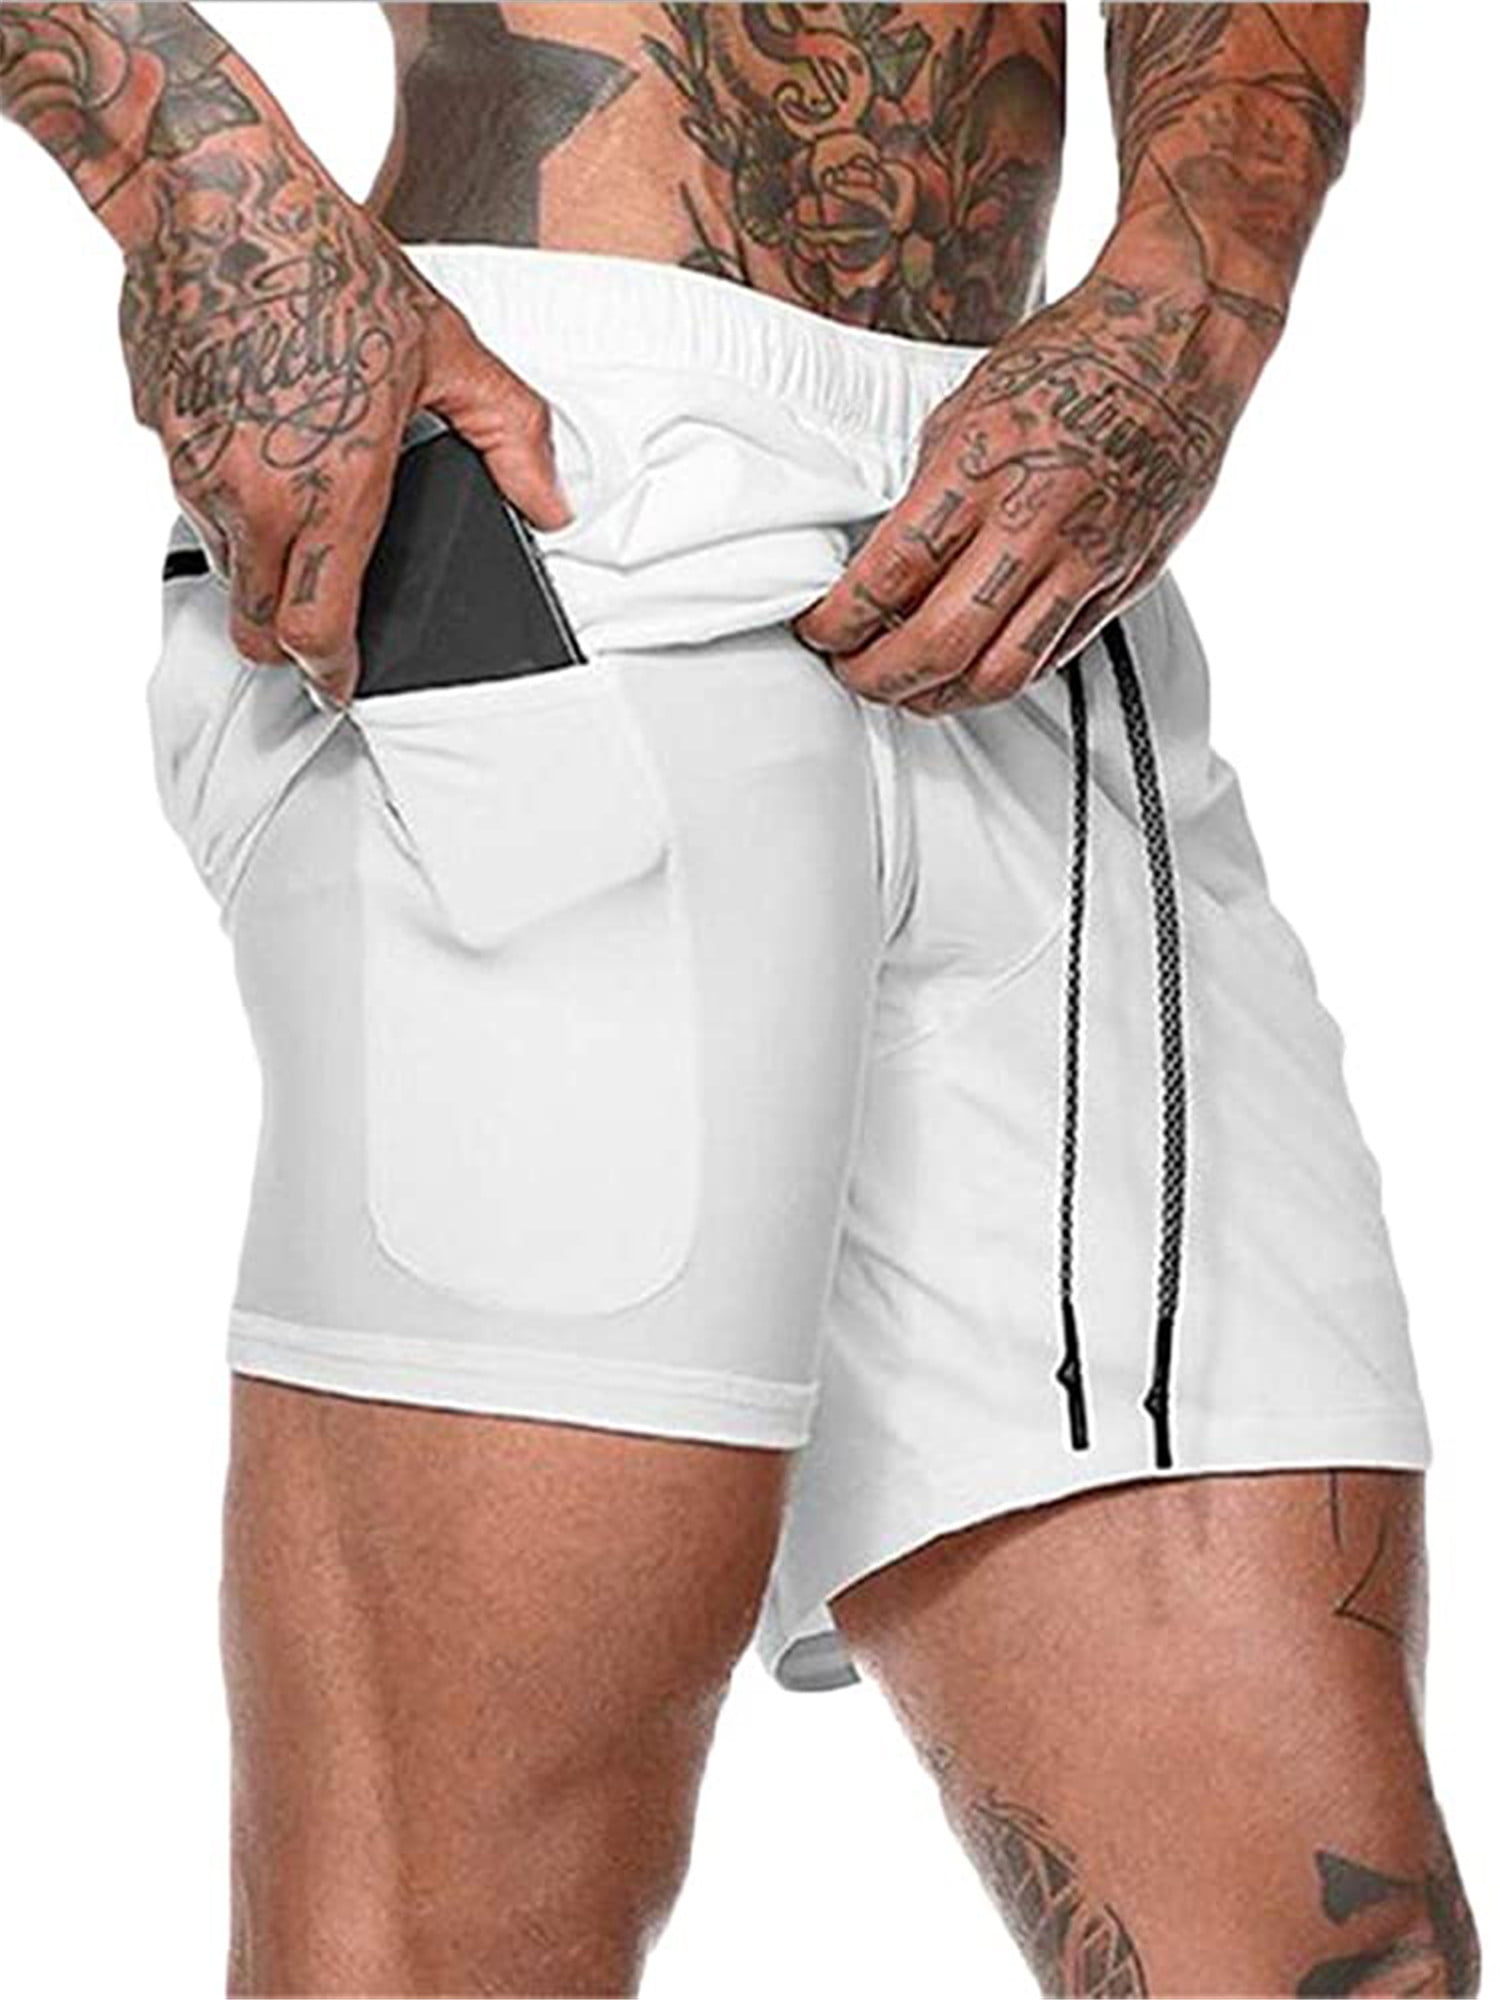 2-in-1 Quick Drying Breathable Lightweight Built-in Compression Liner Athletic Gym Exercise Training Jogging Short Pants with Back Zipper Pocket Men's Workout Running Shorts